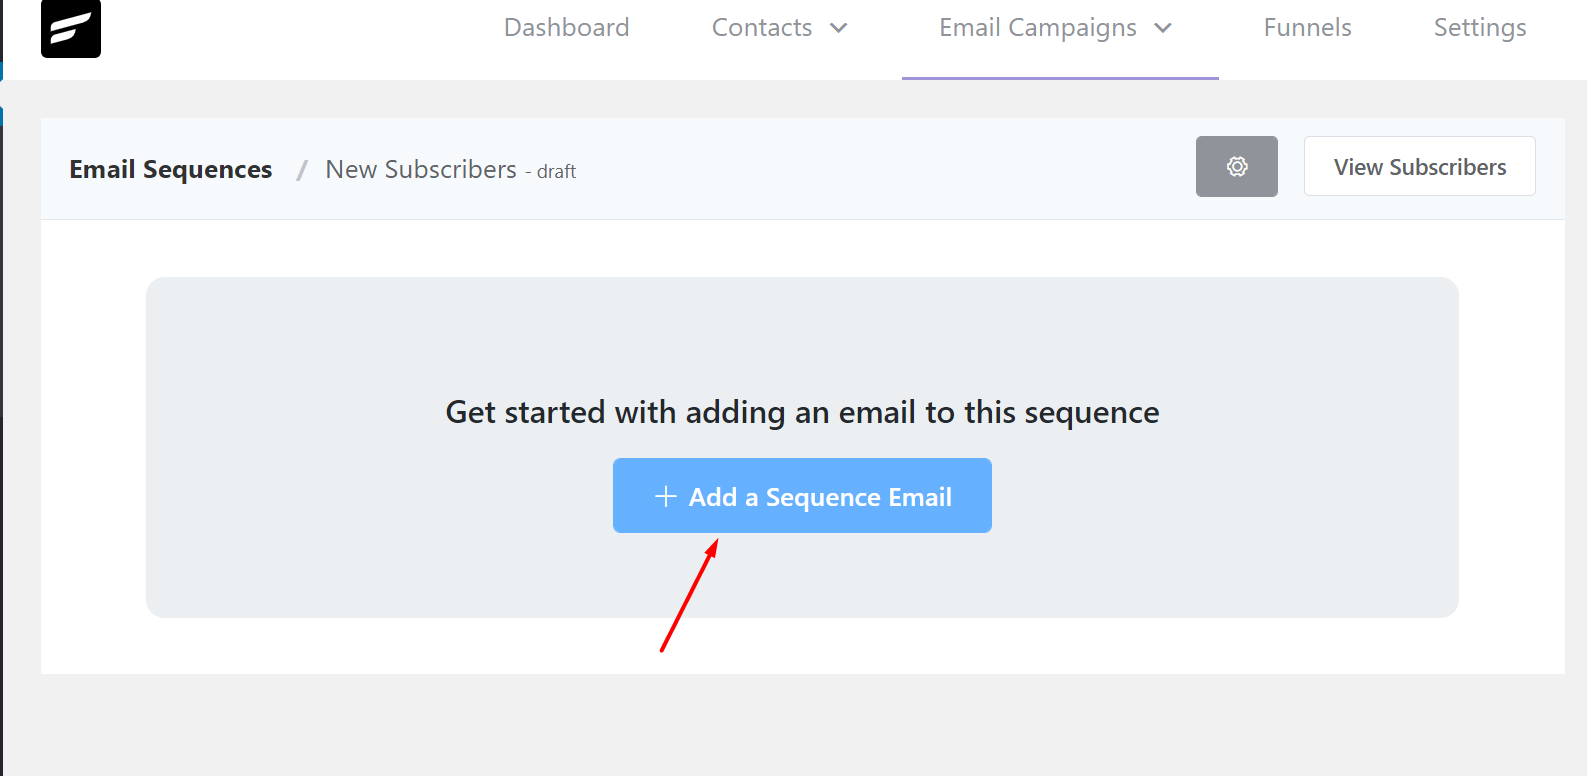 FluentCRM Add a Sequence Email